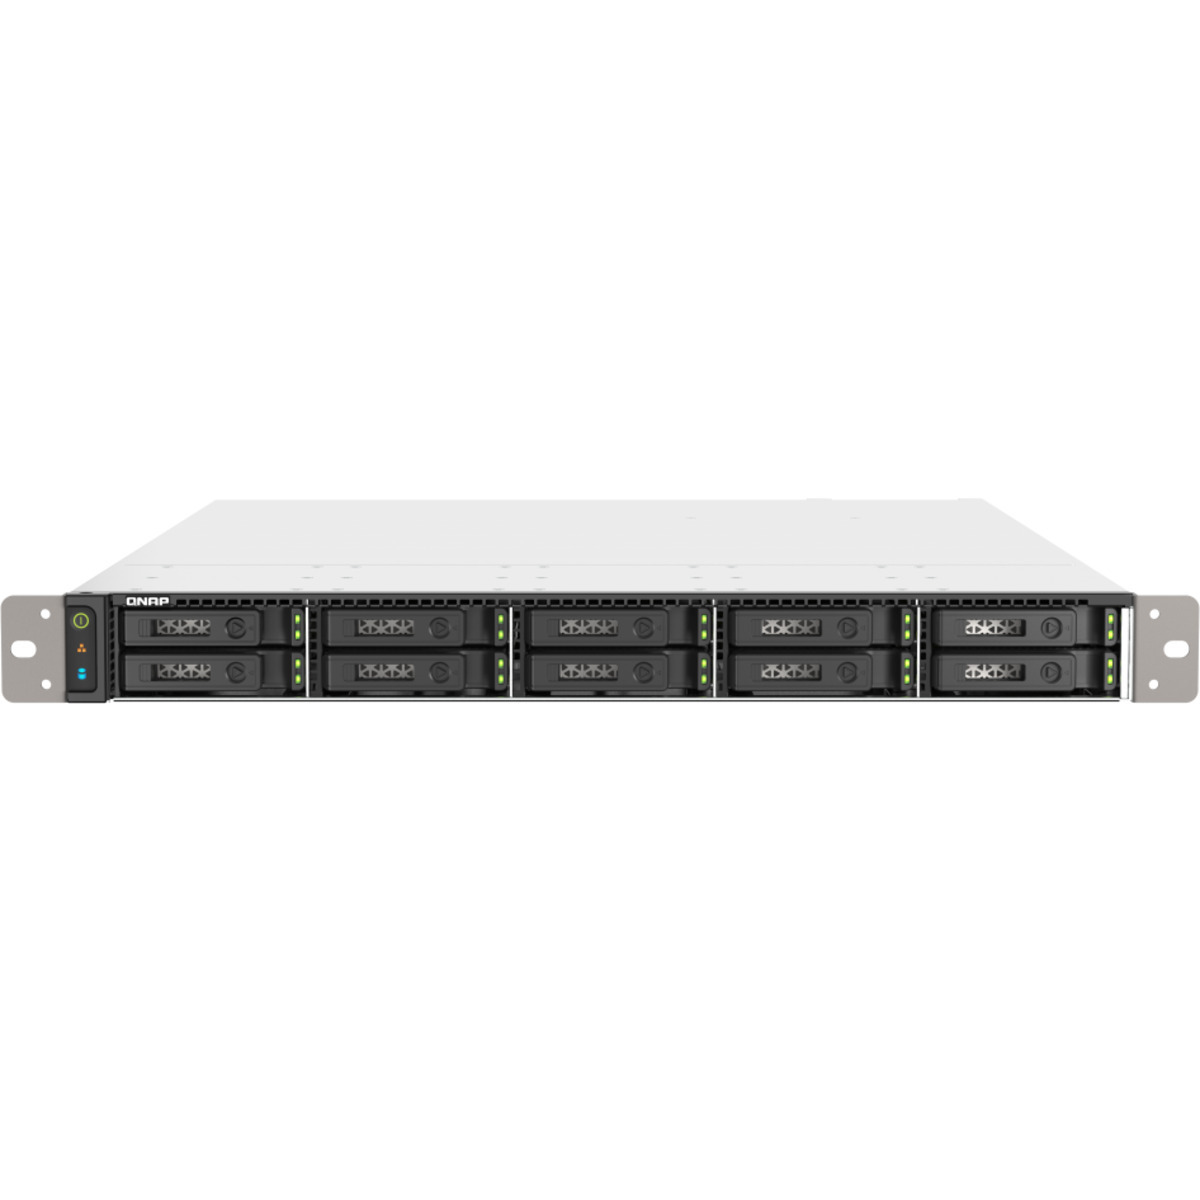 QNAP TS-h1090FU-7232P 48tb 10-Bay RackMount Large Business / Enterprise NAS - Network Attached Storage Device 6x8tb TeamGroup EX2 Elite T253E2008T0C101 2.5 550/520MB/s SATA 6Gb/s SSD CONSUMER Class Drives Installed - Burn-In Tested TS-h1090FU-7232P